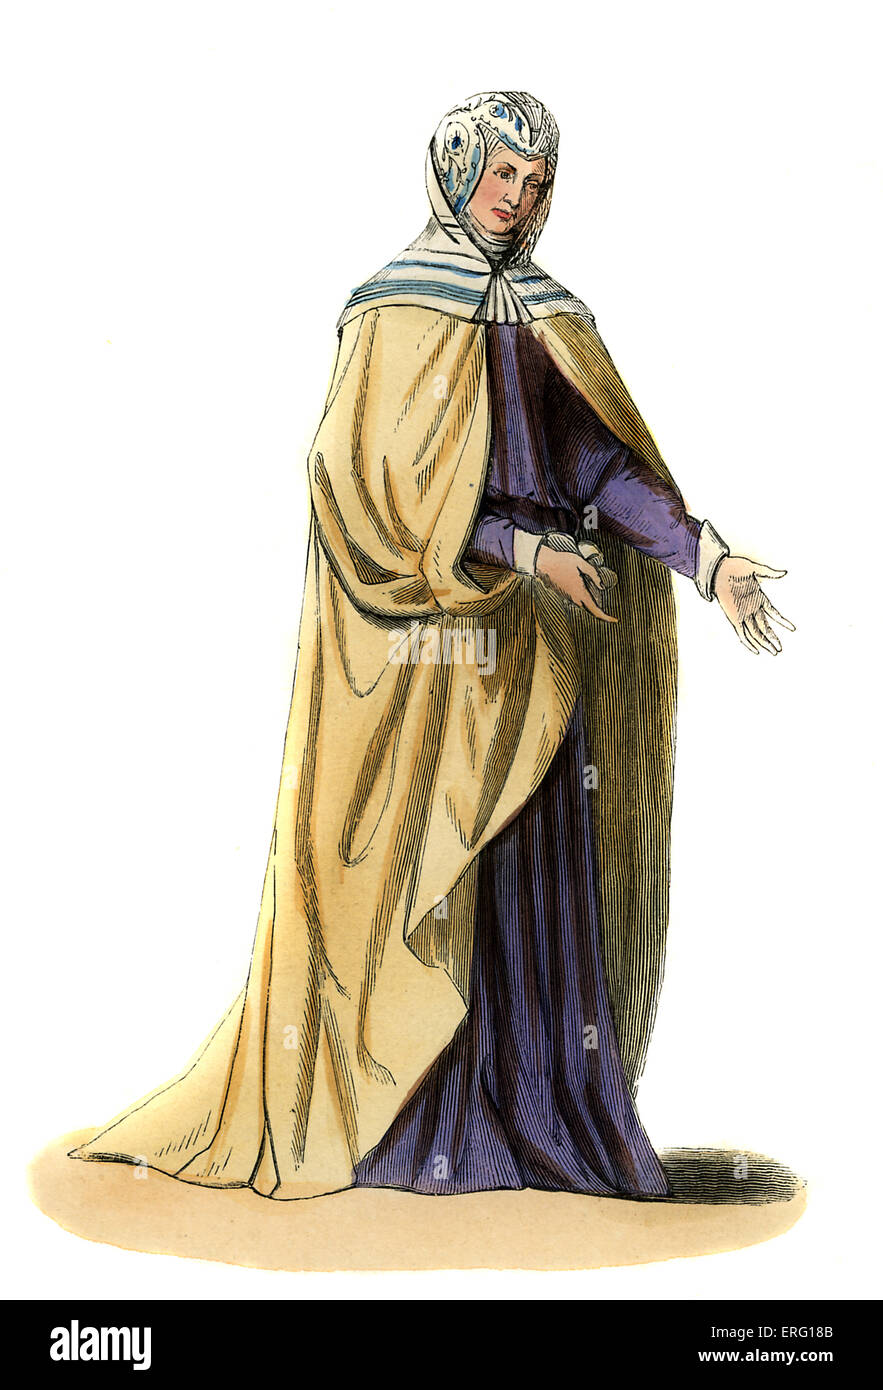 Spanish noble woman- 15th century costume. Wearing purple dress, white cloak, a caul, and hood traced with blue.  c. 1847 Stock Photo